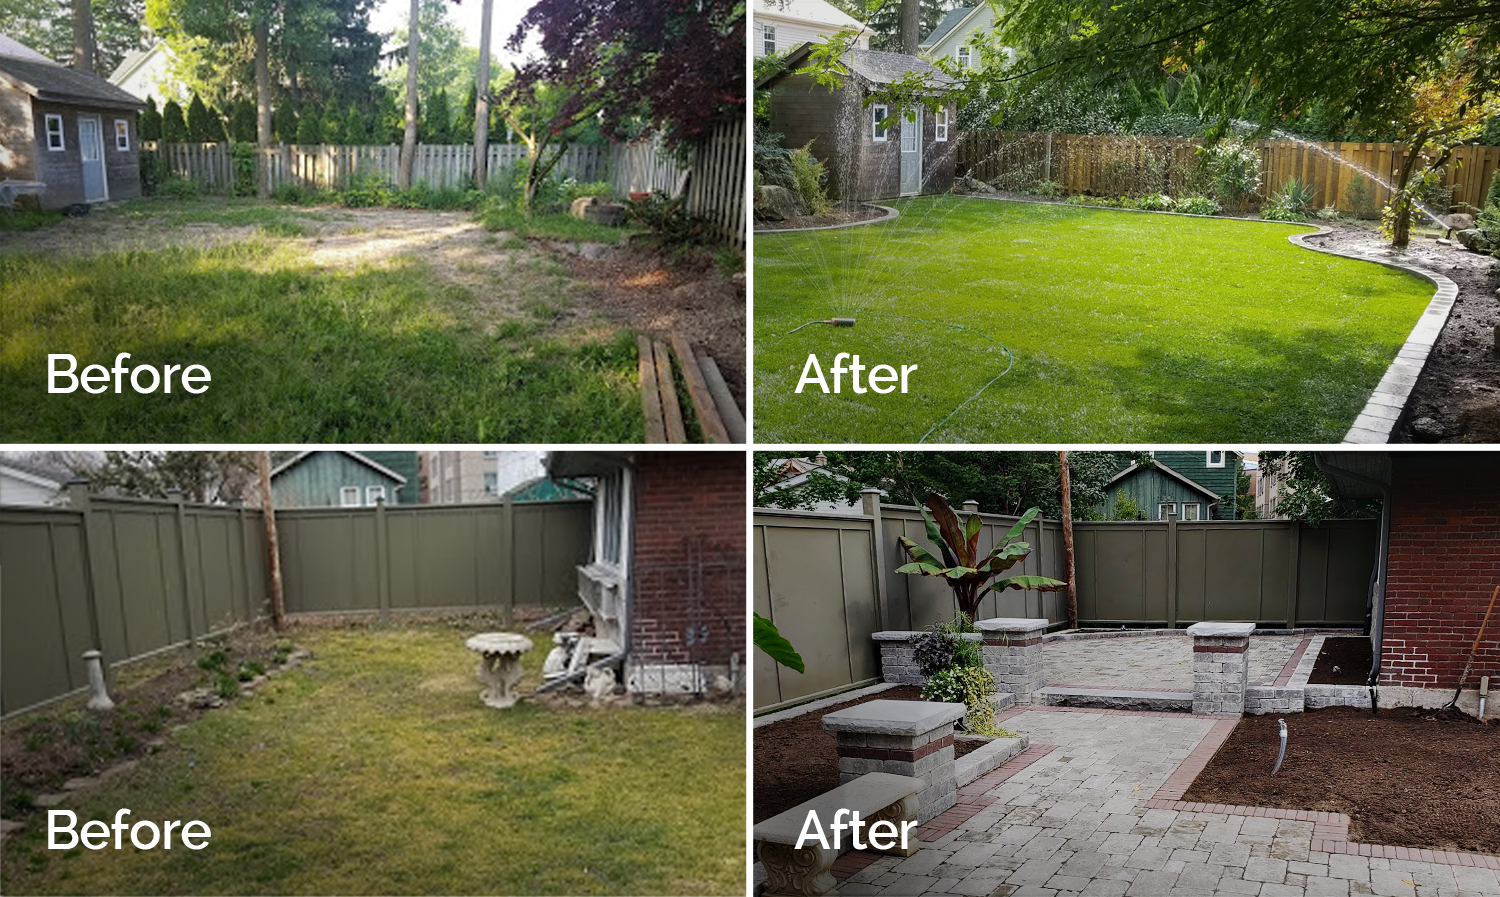 Before and After Views of Landscaping Projects